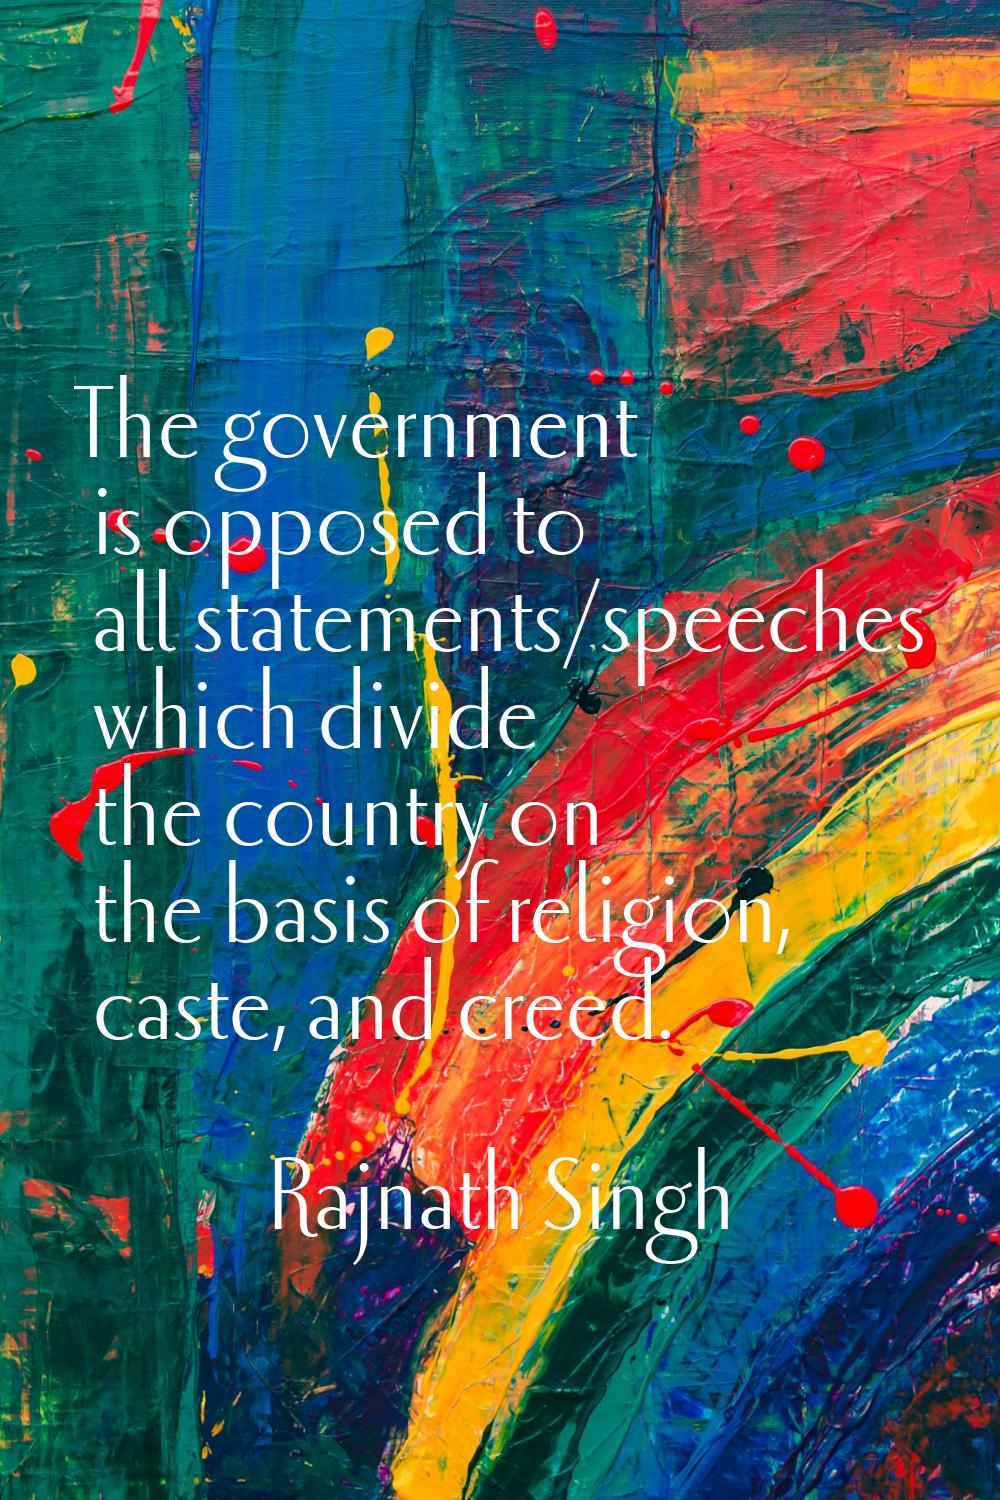 The government is opposed to all statements/speeches which divide the country on the basis of relig